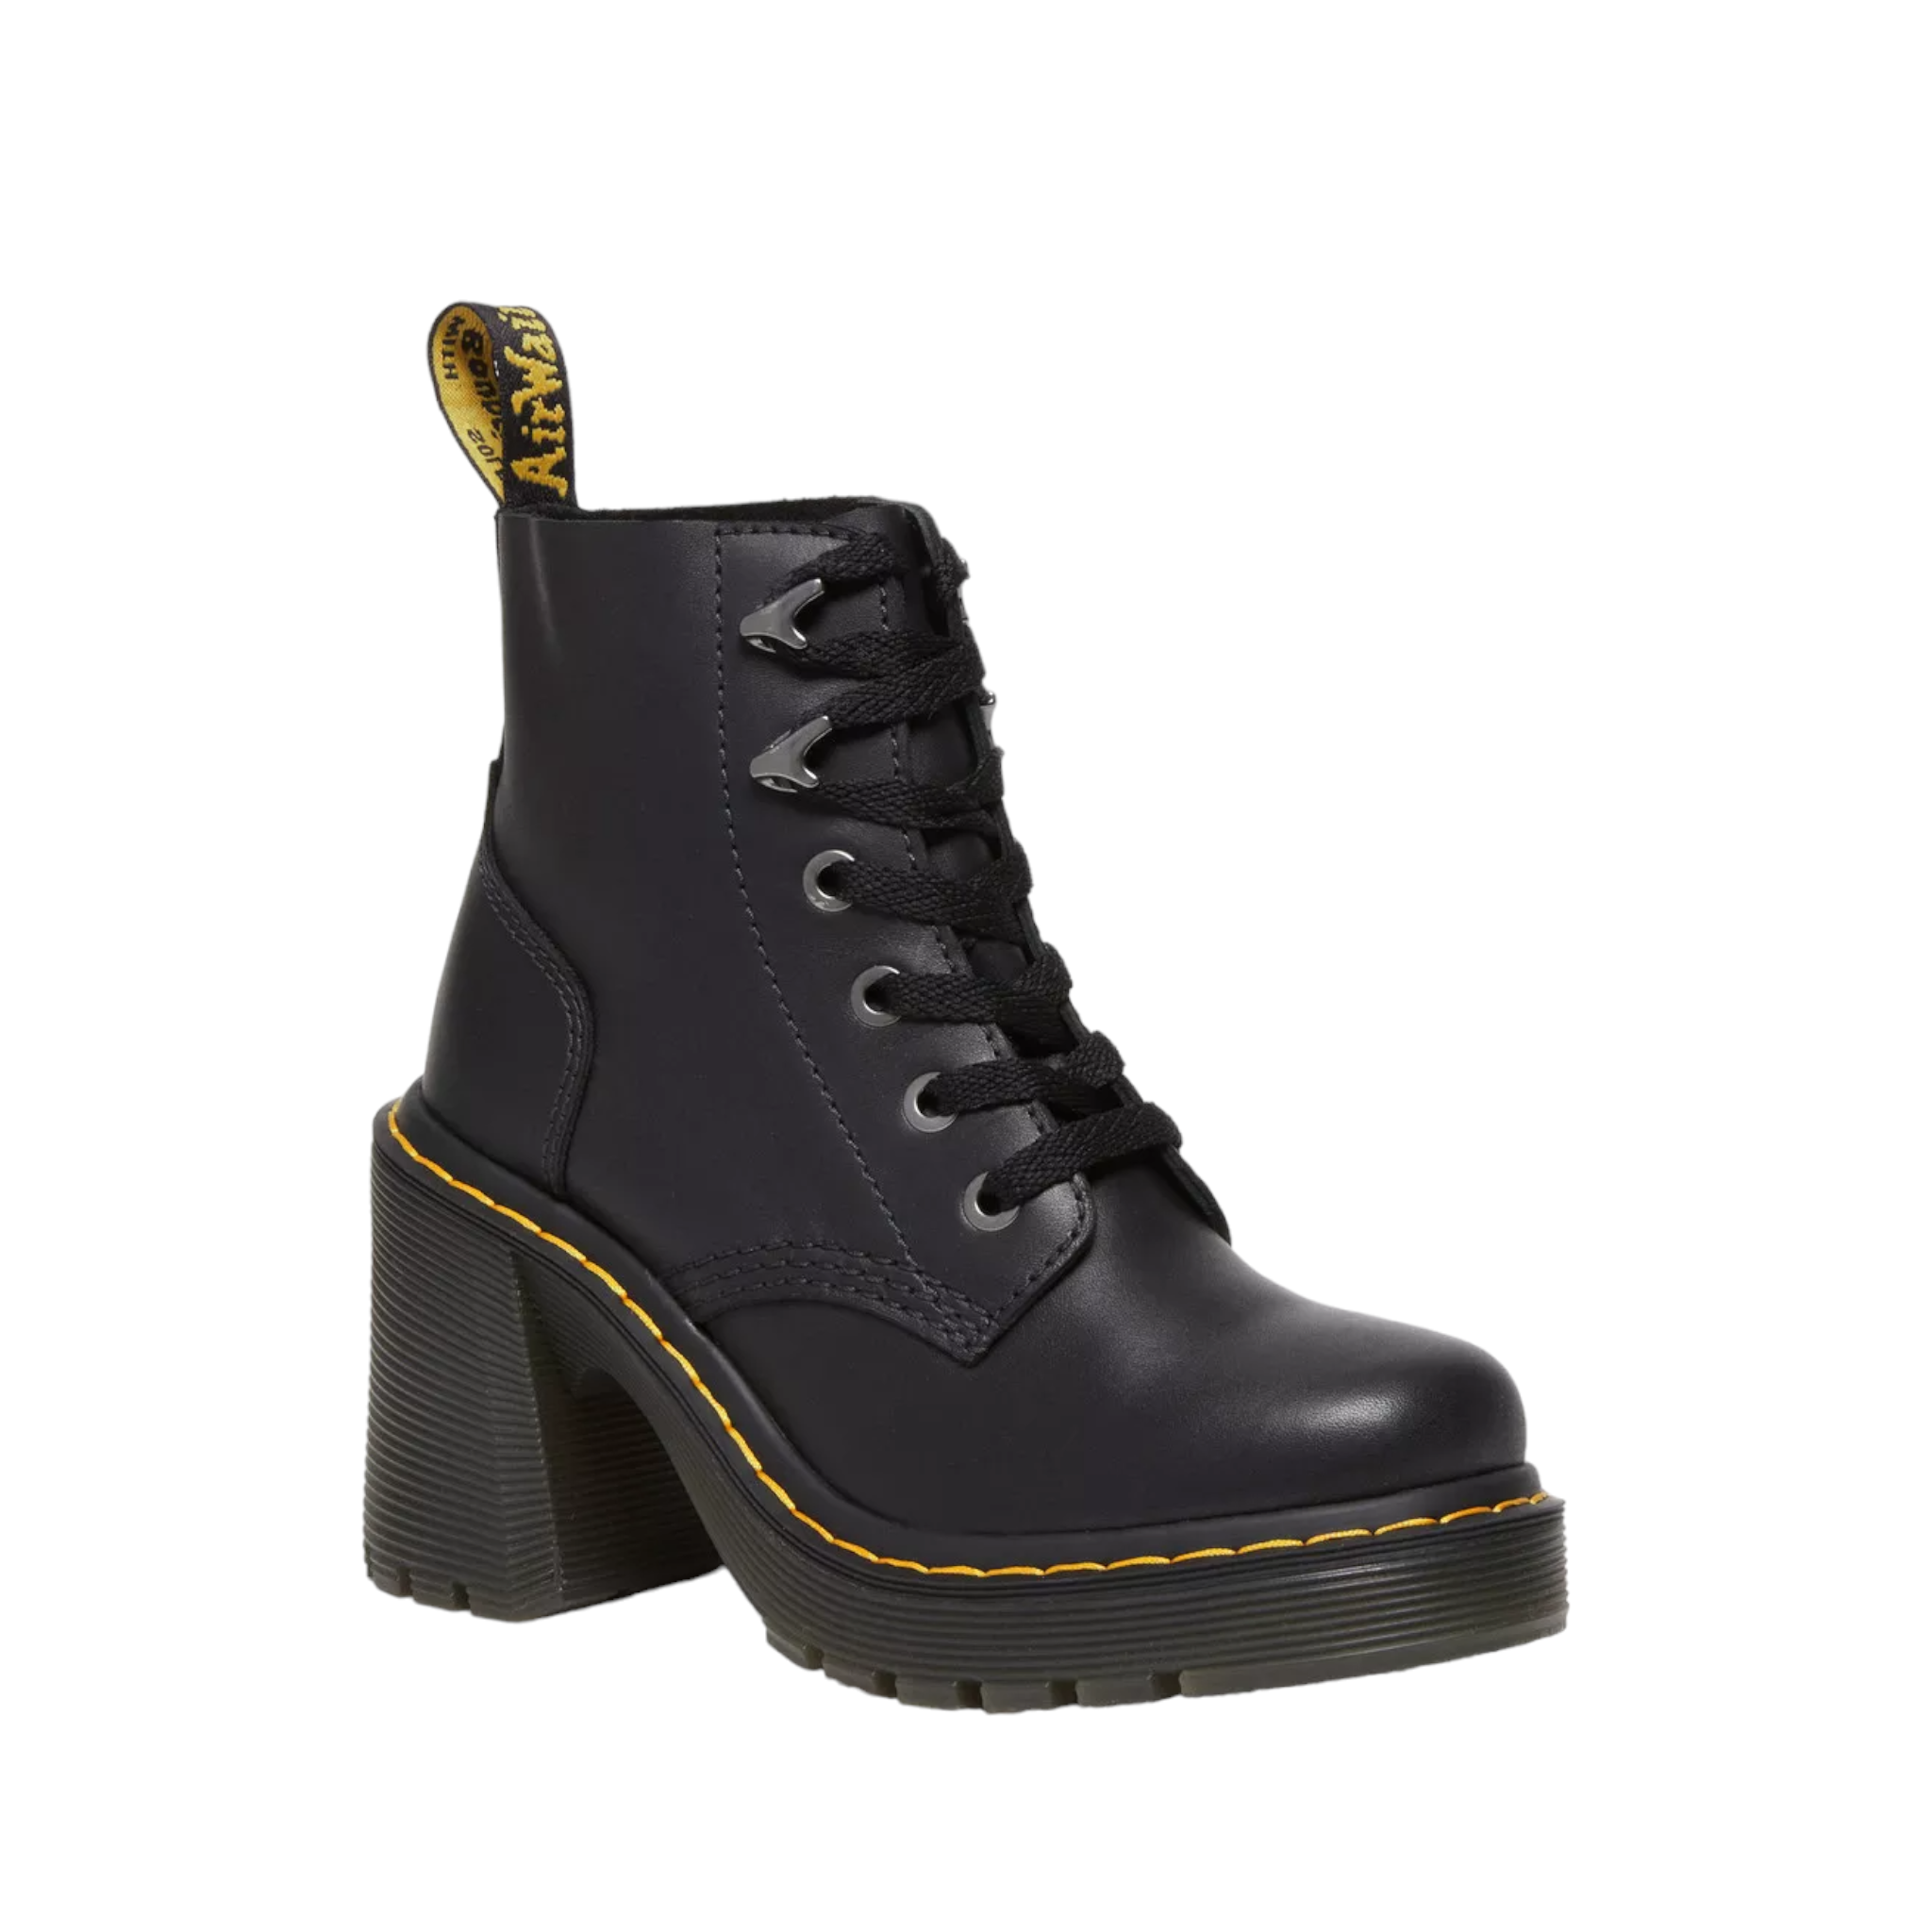 Jesy Dr. Marten Boots with heel and platform sole. Shop Online and in-store with shoe&amp;me Mount Maunganui. Iconic yellow Stitch with unique eyelets and pull-tab.